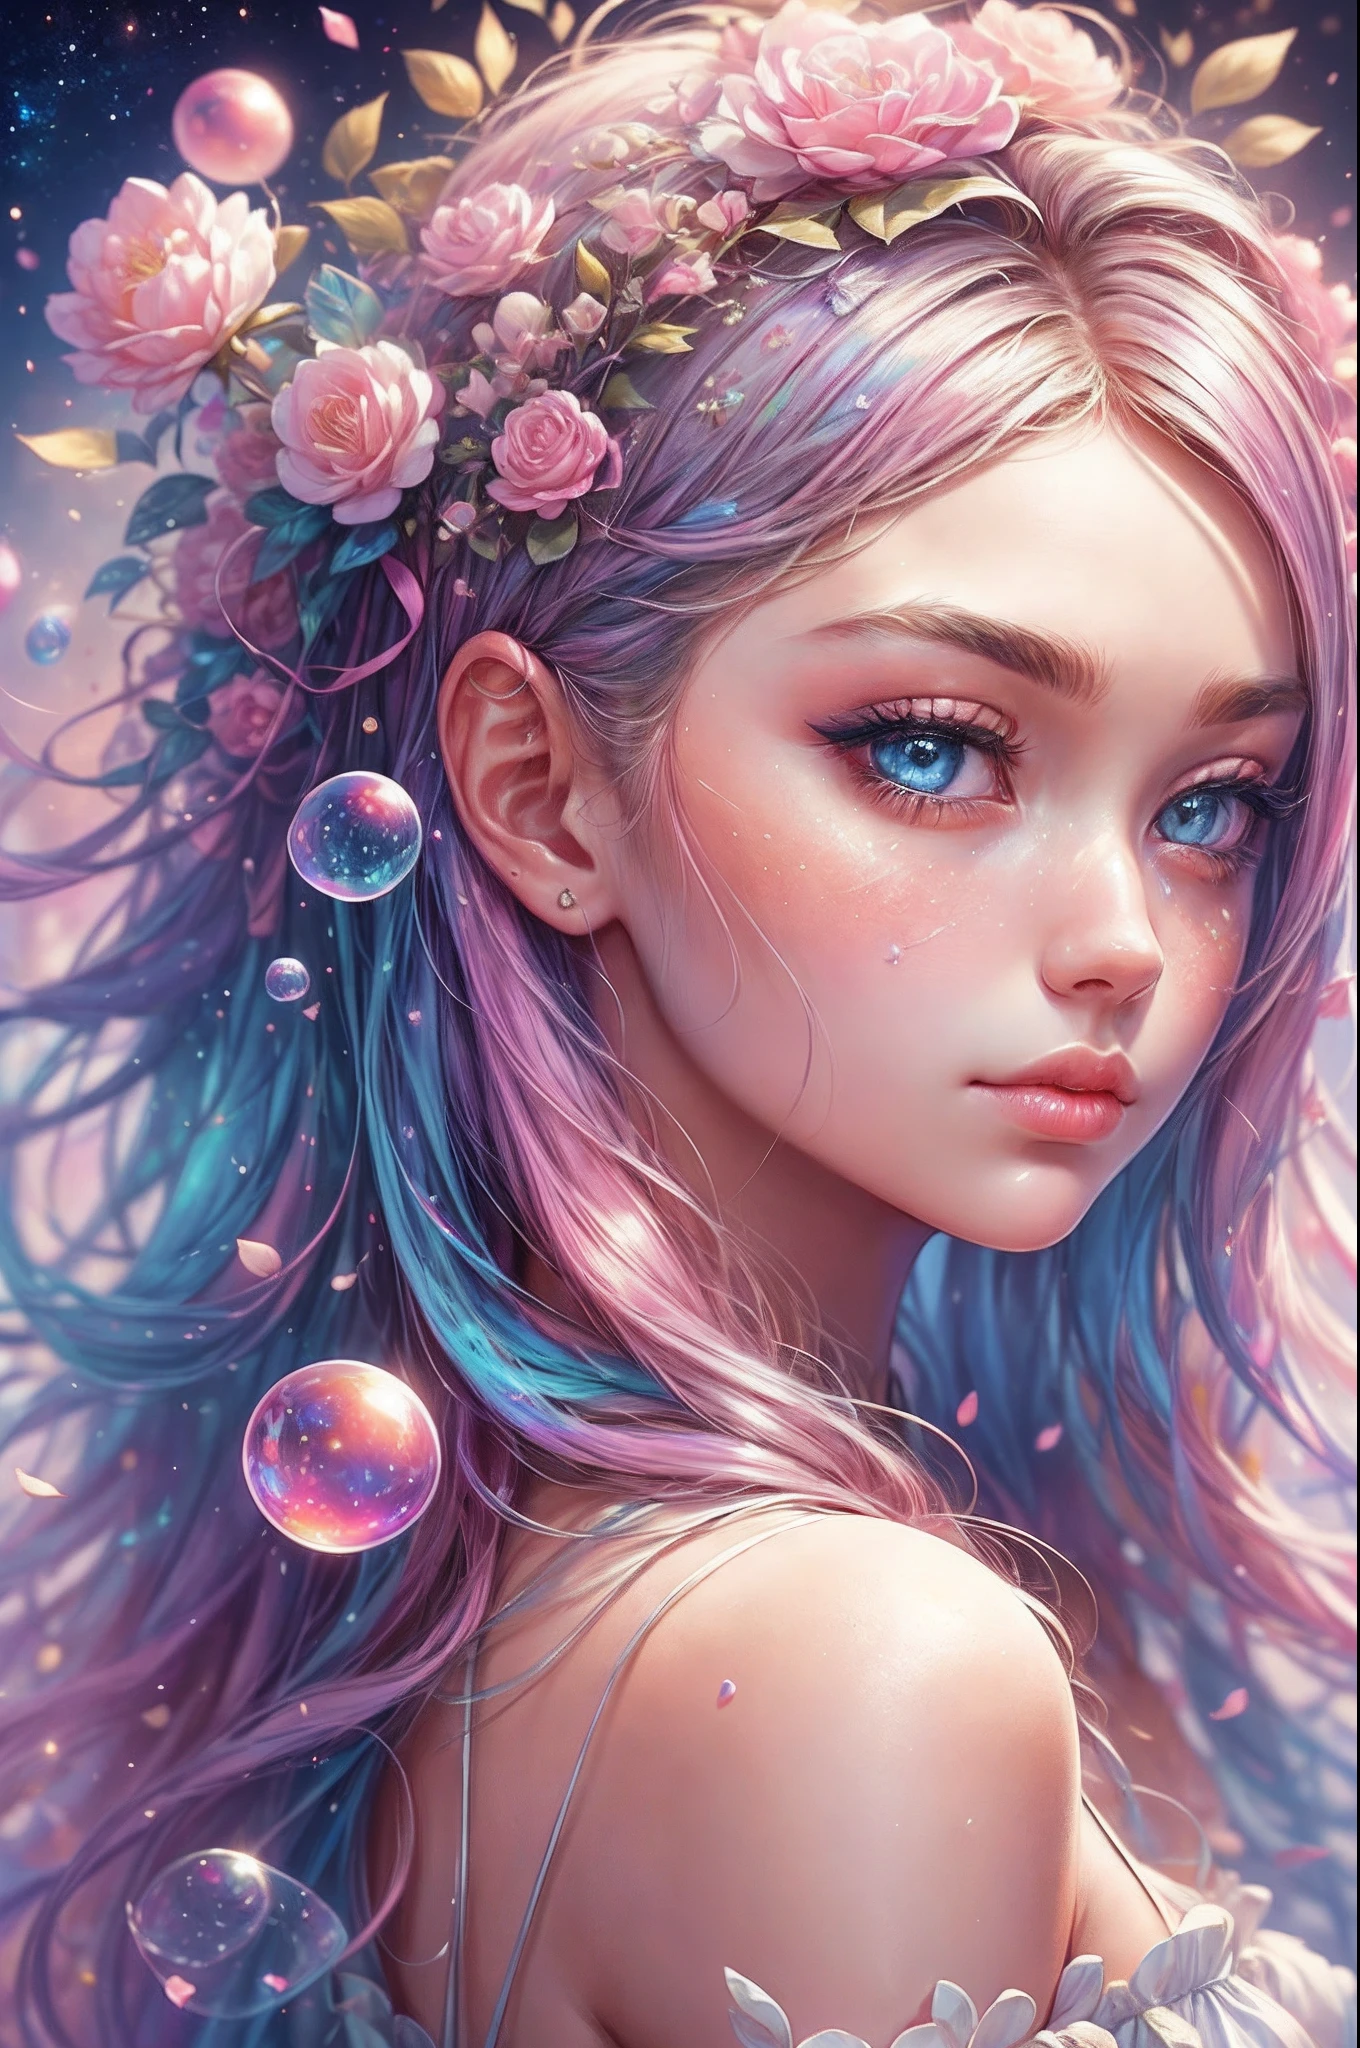 ((masterpiece)). This artwork is sweet, dreamy and ethereal, with soft pink watercolor hues and many ornate cotton candy accents. Generate a delicate and demure English fae exploring a (bubblegum world with a wide variety of pastel shades). Her sweet face is extremely detailed and realistic with elegant features and a sweet and subtle expression and looks like ((Gigi Hadid)). Include mature features, puffy lips, and stunning, highly realistic eyes. Her eyes are important and should be realistic, highly detailed, and beautiful. In high definition and detail, include lots of details like stars, galaxies, colorful bubbles, colorful petals, and lots of energy and emotion! The stars and colorful bubblegum bubbles are important! Include fantasy details, enhanced details, iridescence, colorful glittering wind, and pollen. Pay special attention to her face and make sure it is beautifully and realistically detailed. The image should be dreamy and ethereal.8k, intricate, elegant, highly detailed, majestic, digital photography